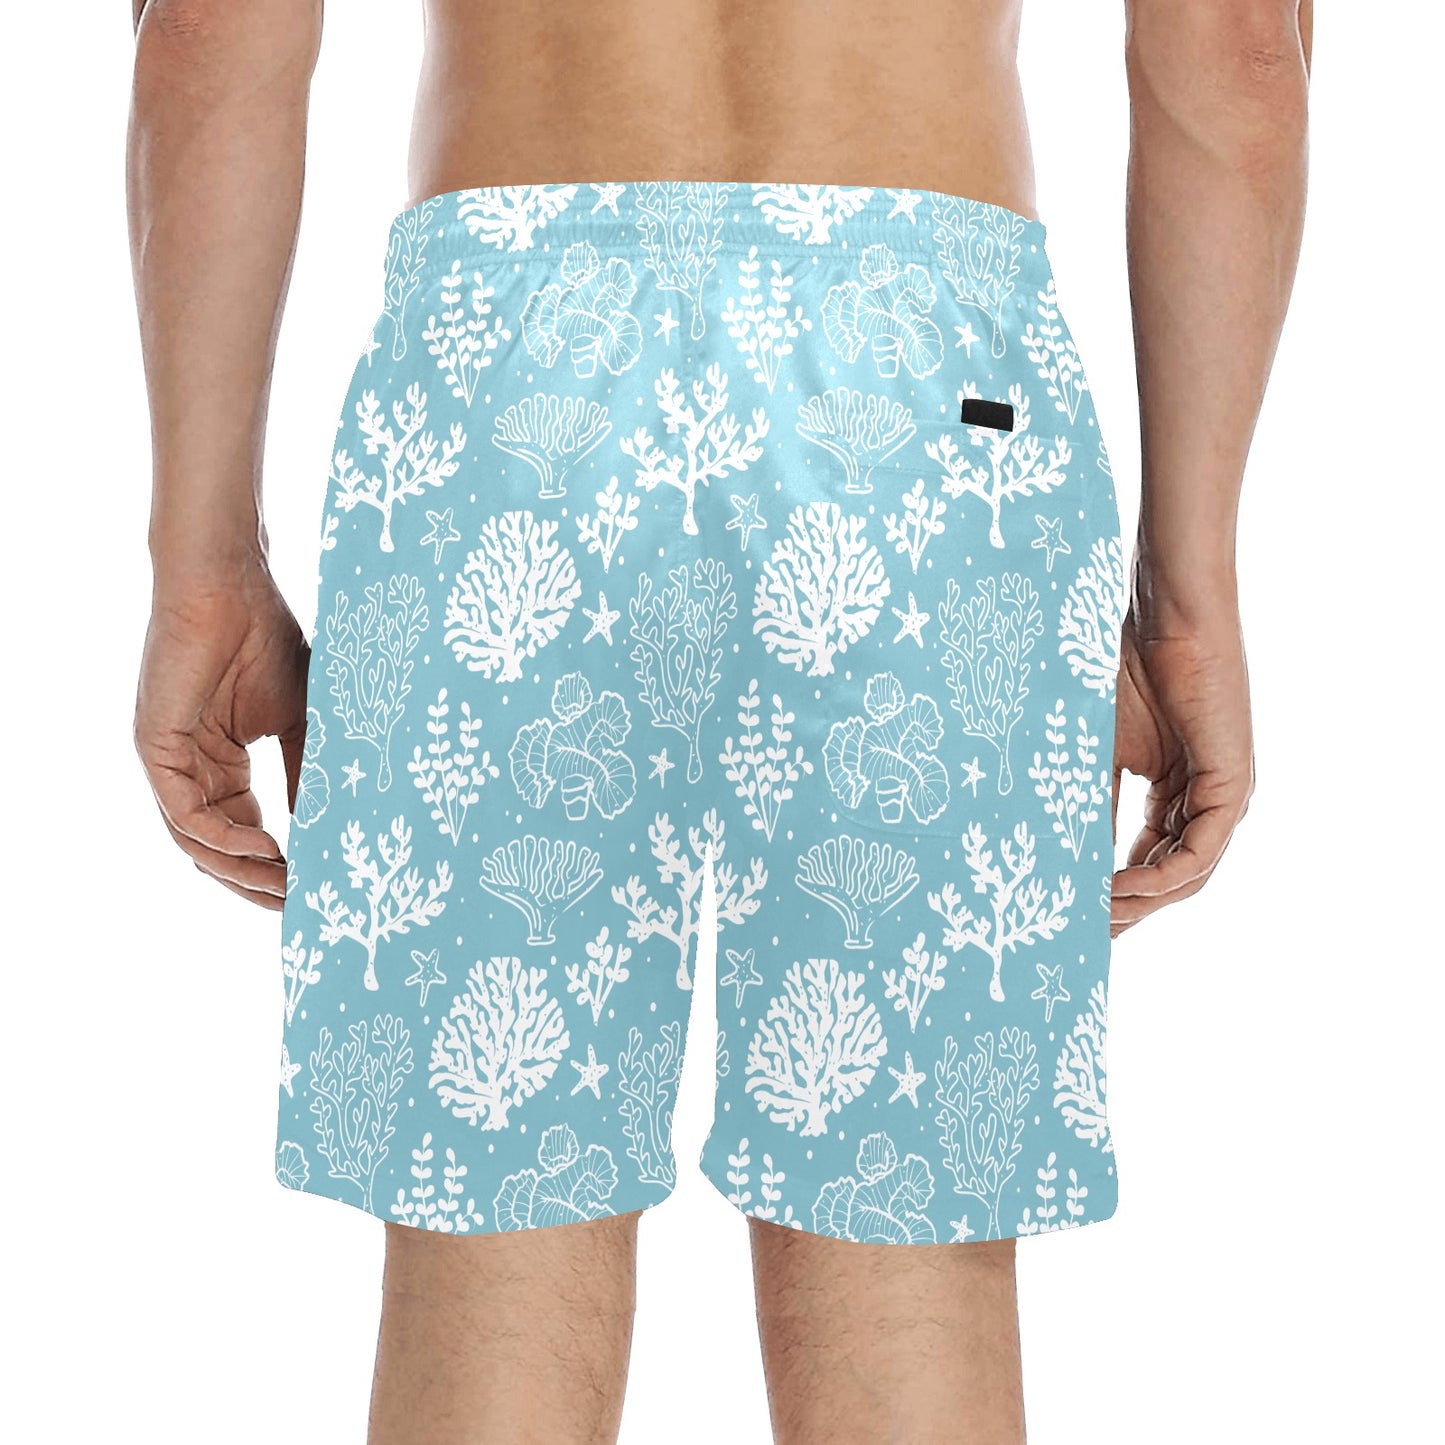 Coral Reef Men Mid Length Shorts, Ocean Sea Beach Swim Trunks Front and Back Pockets & Mesh Drawstring Boys Casual Bathing Suit Summer Starcove Fashion